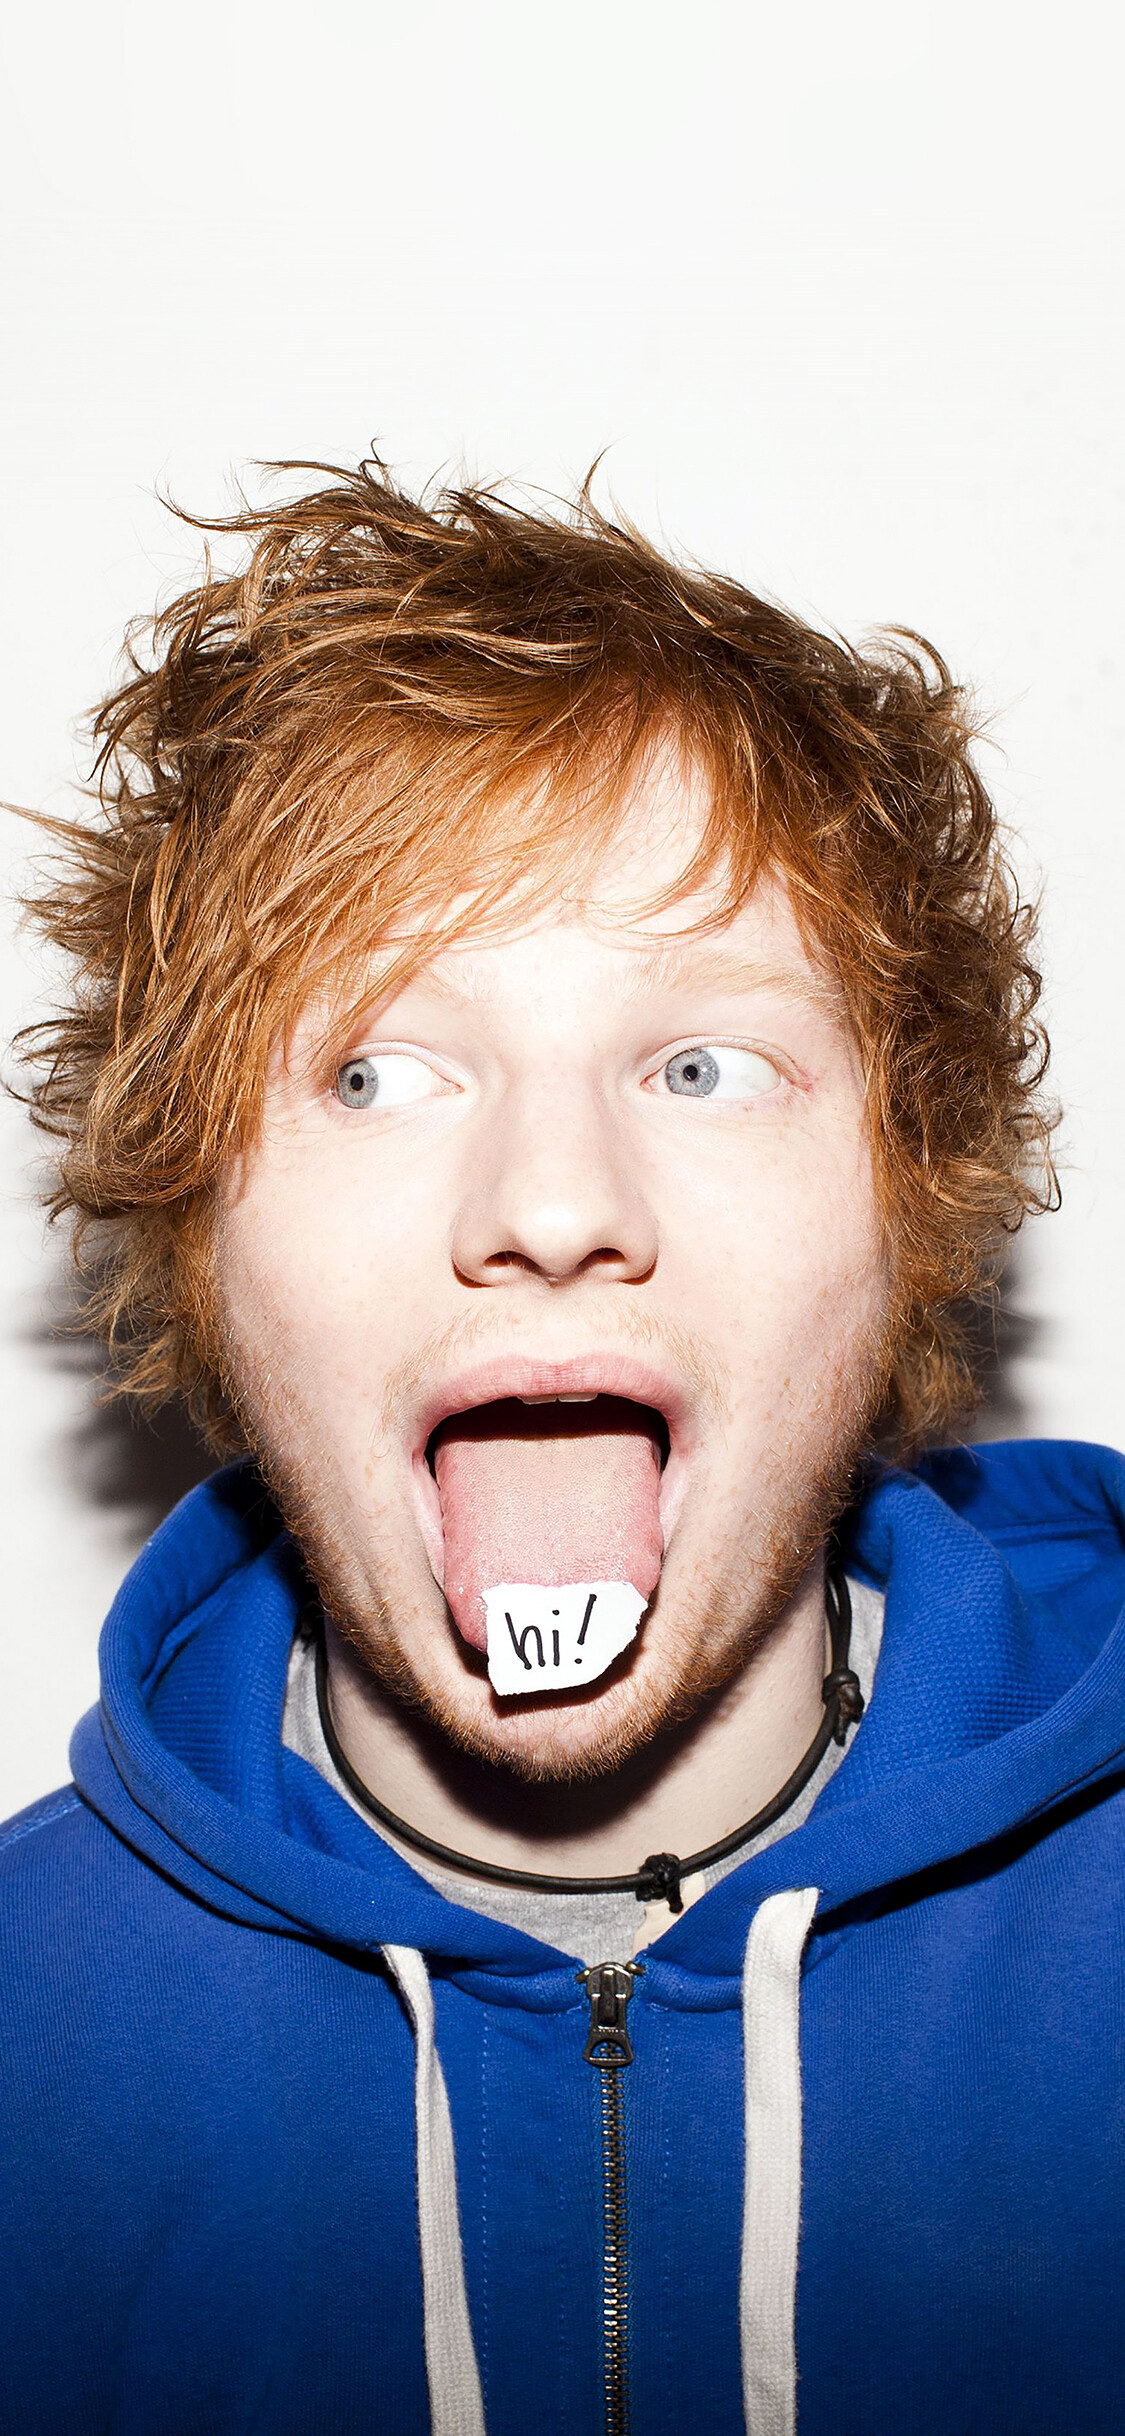 Ed Sheeran: "I See Fire" saw release on the soundtrack for The Hobbit: The Desolation of Smaug. 1130x2440 HD Wallpaper.